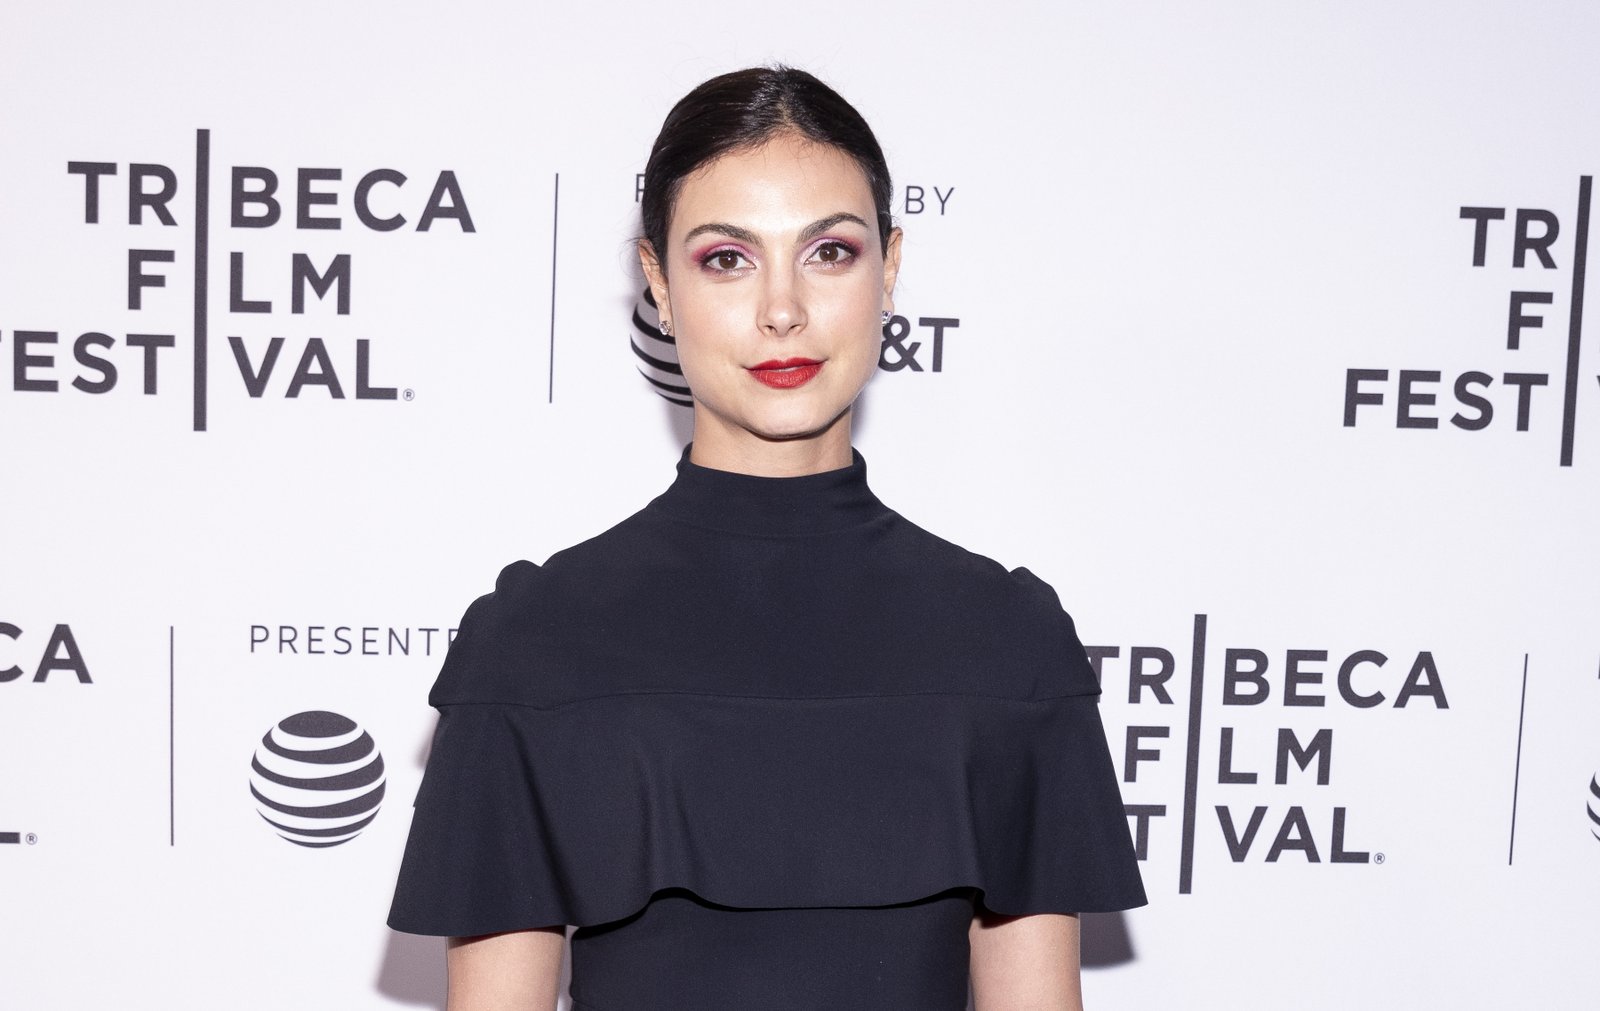 Morena Baccarin Measurements: Height, Weight & More